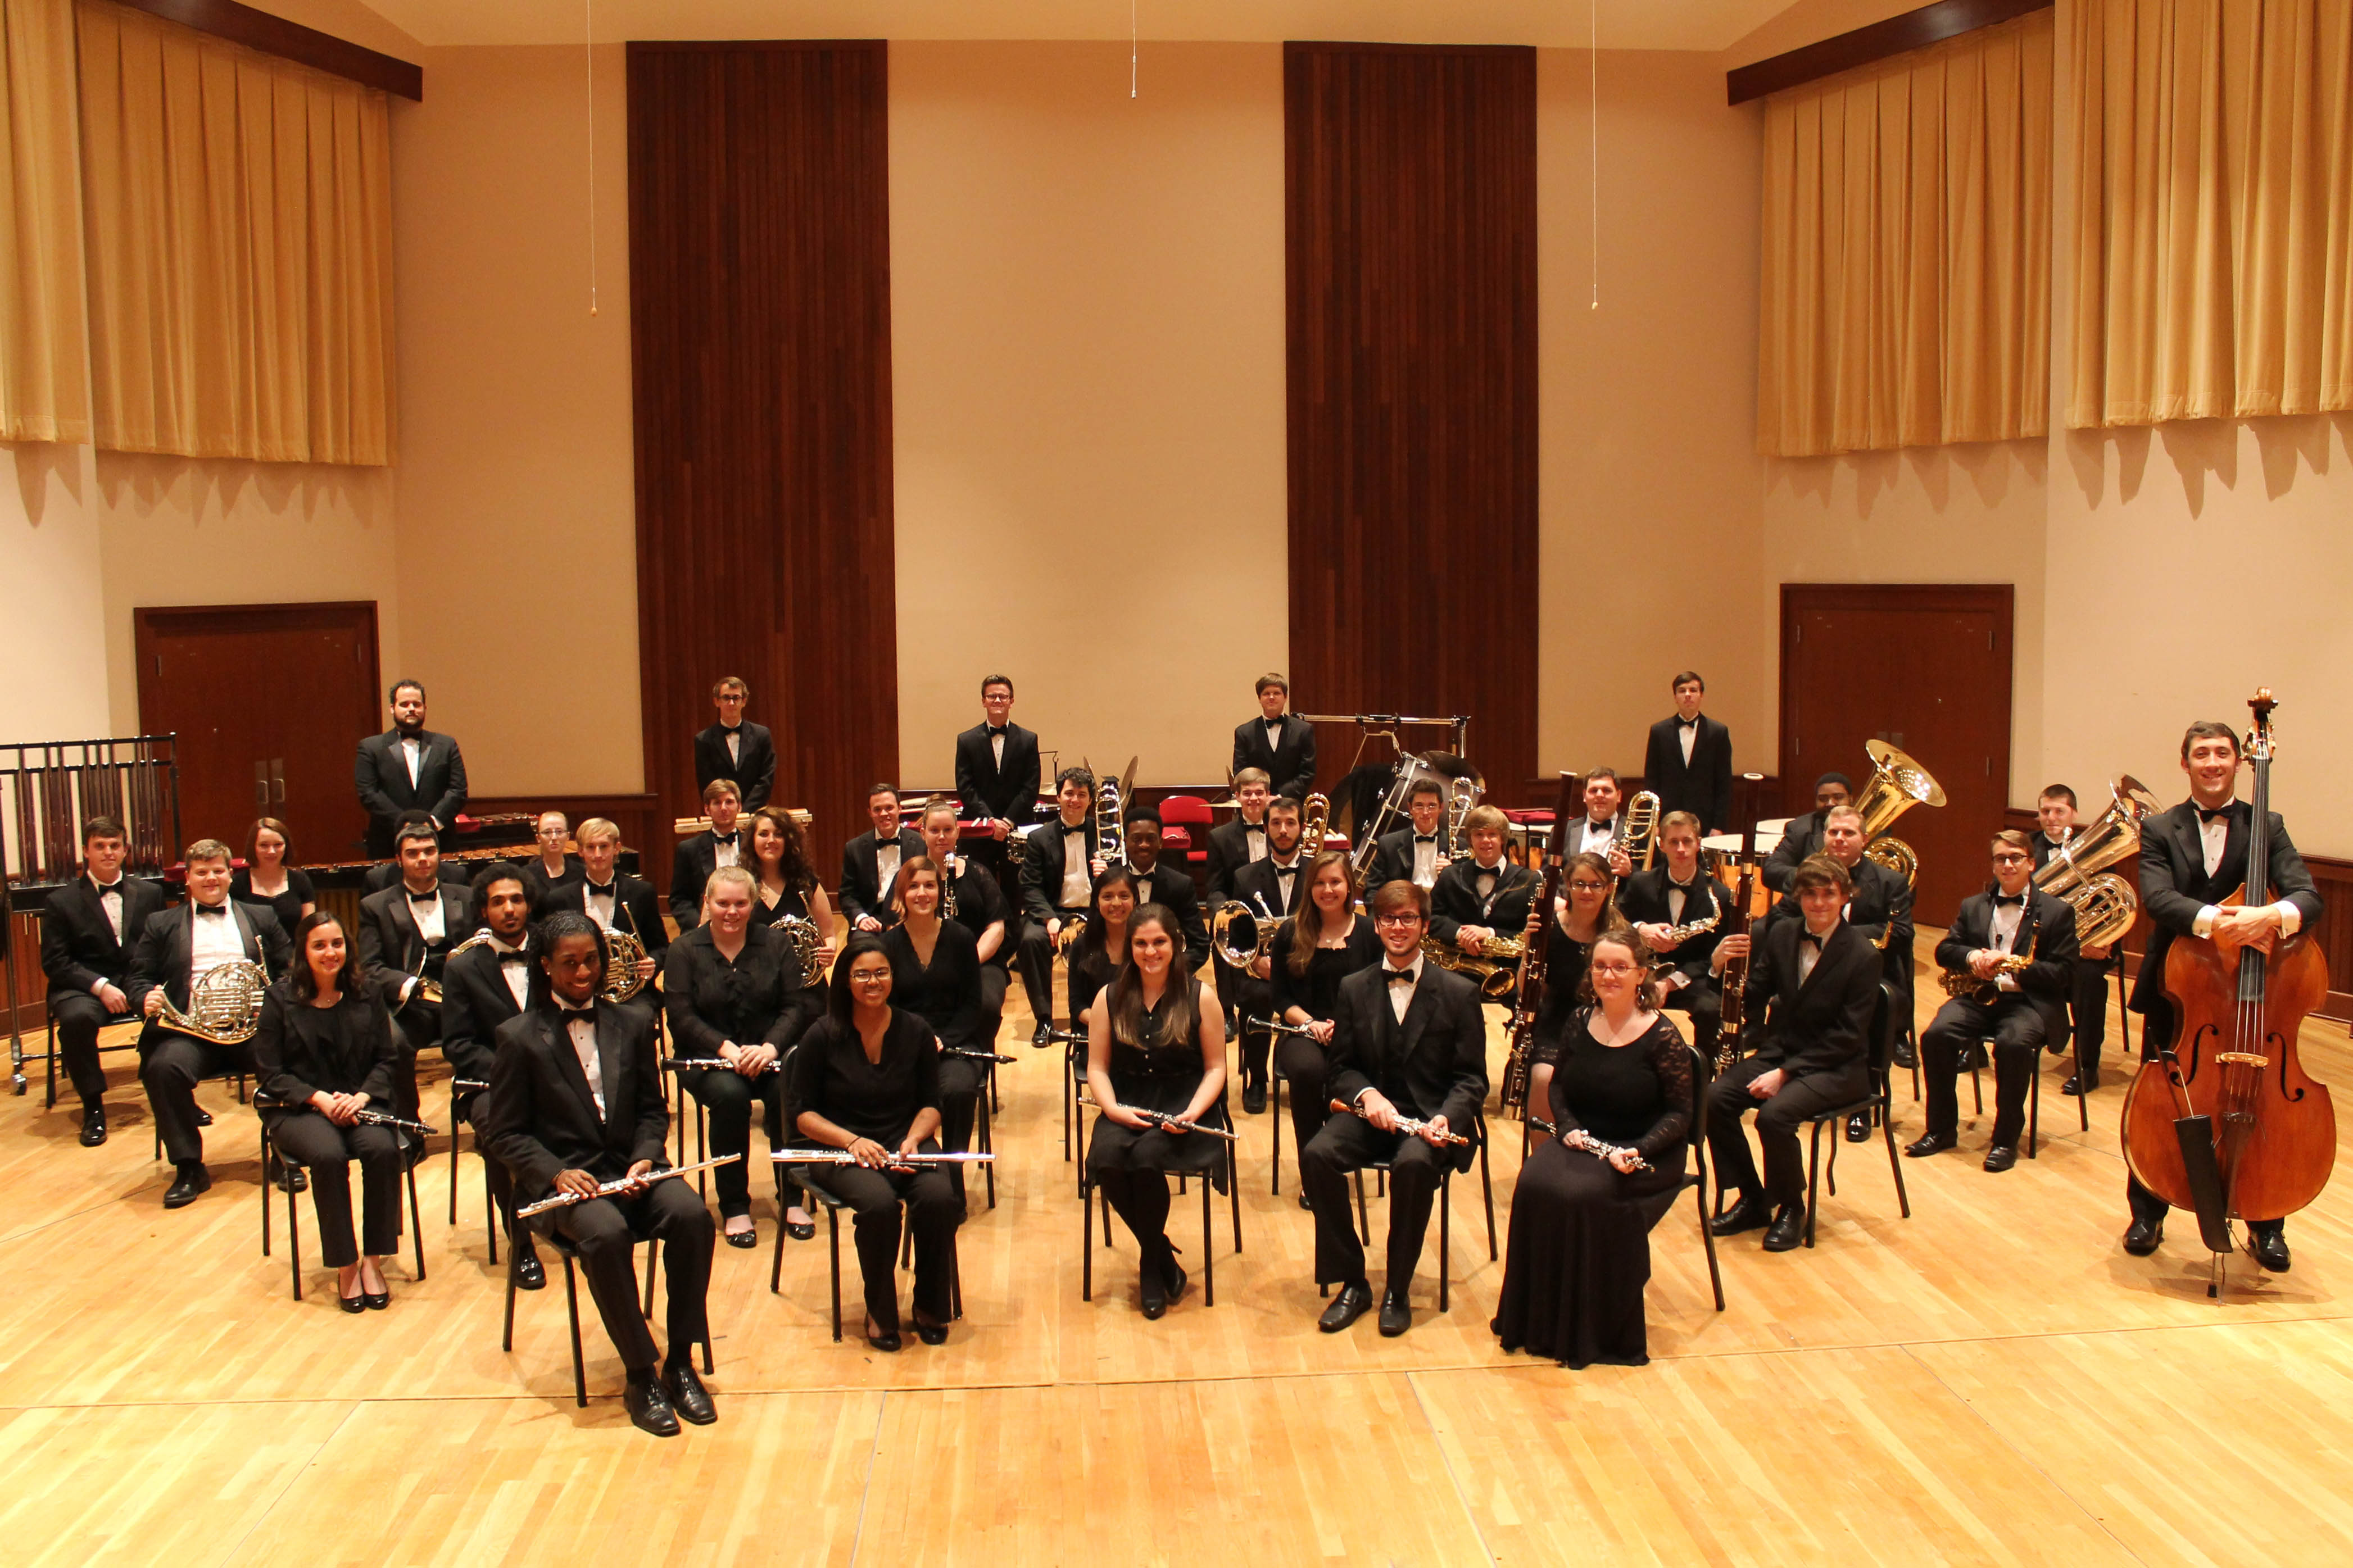 members of USA Wind Ensemble and Symphony Band on stage in before performance